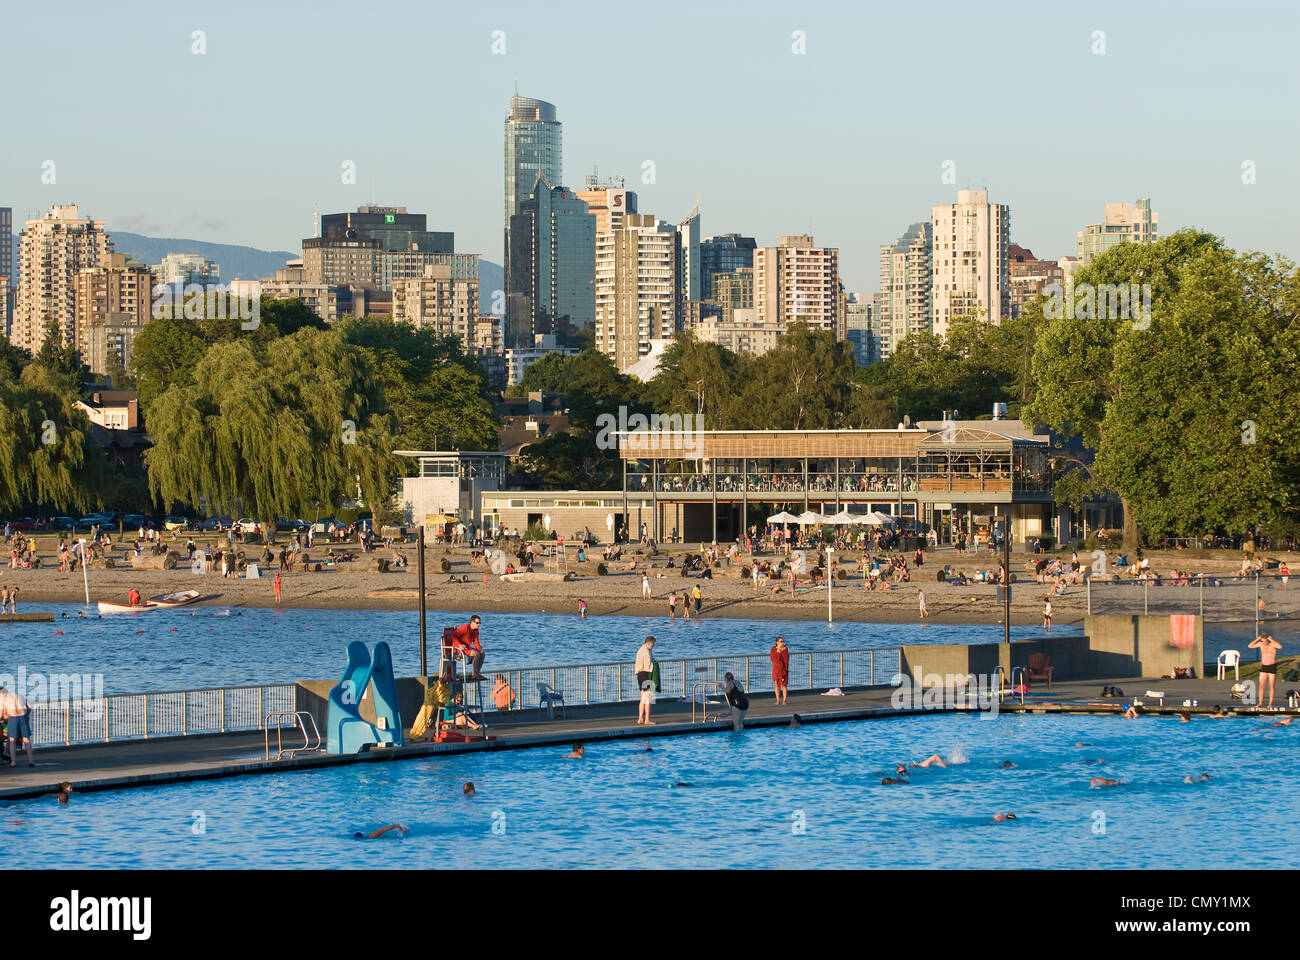 Late day view of people swimming in Kitsilano pool, Vancouver, British Columbia Stock Photo